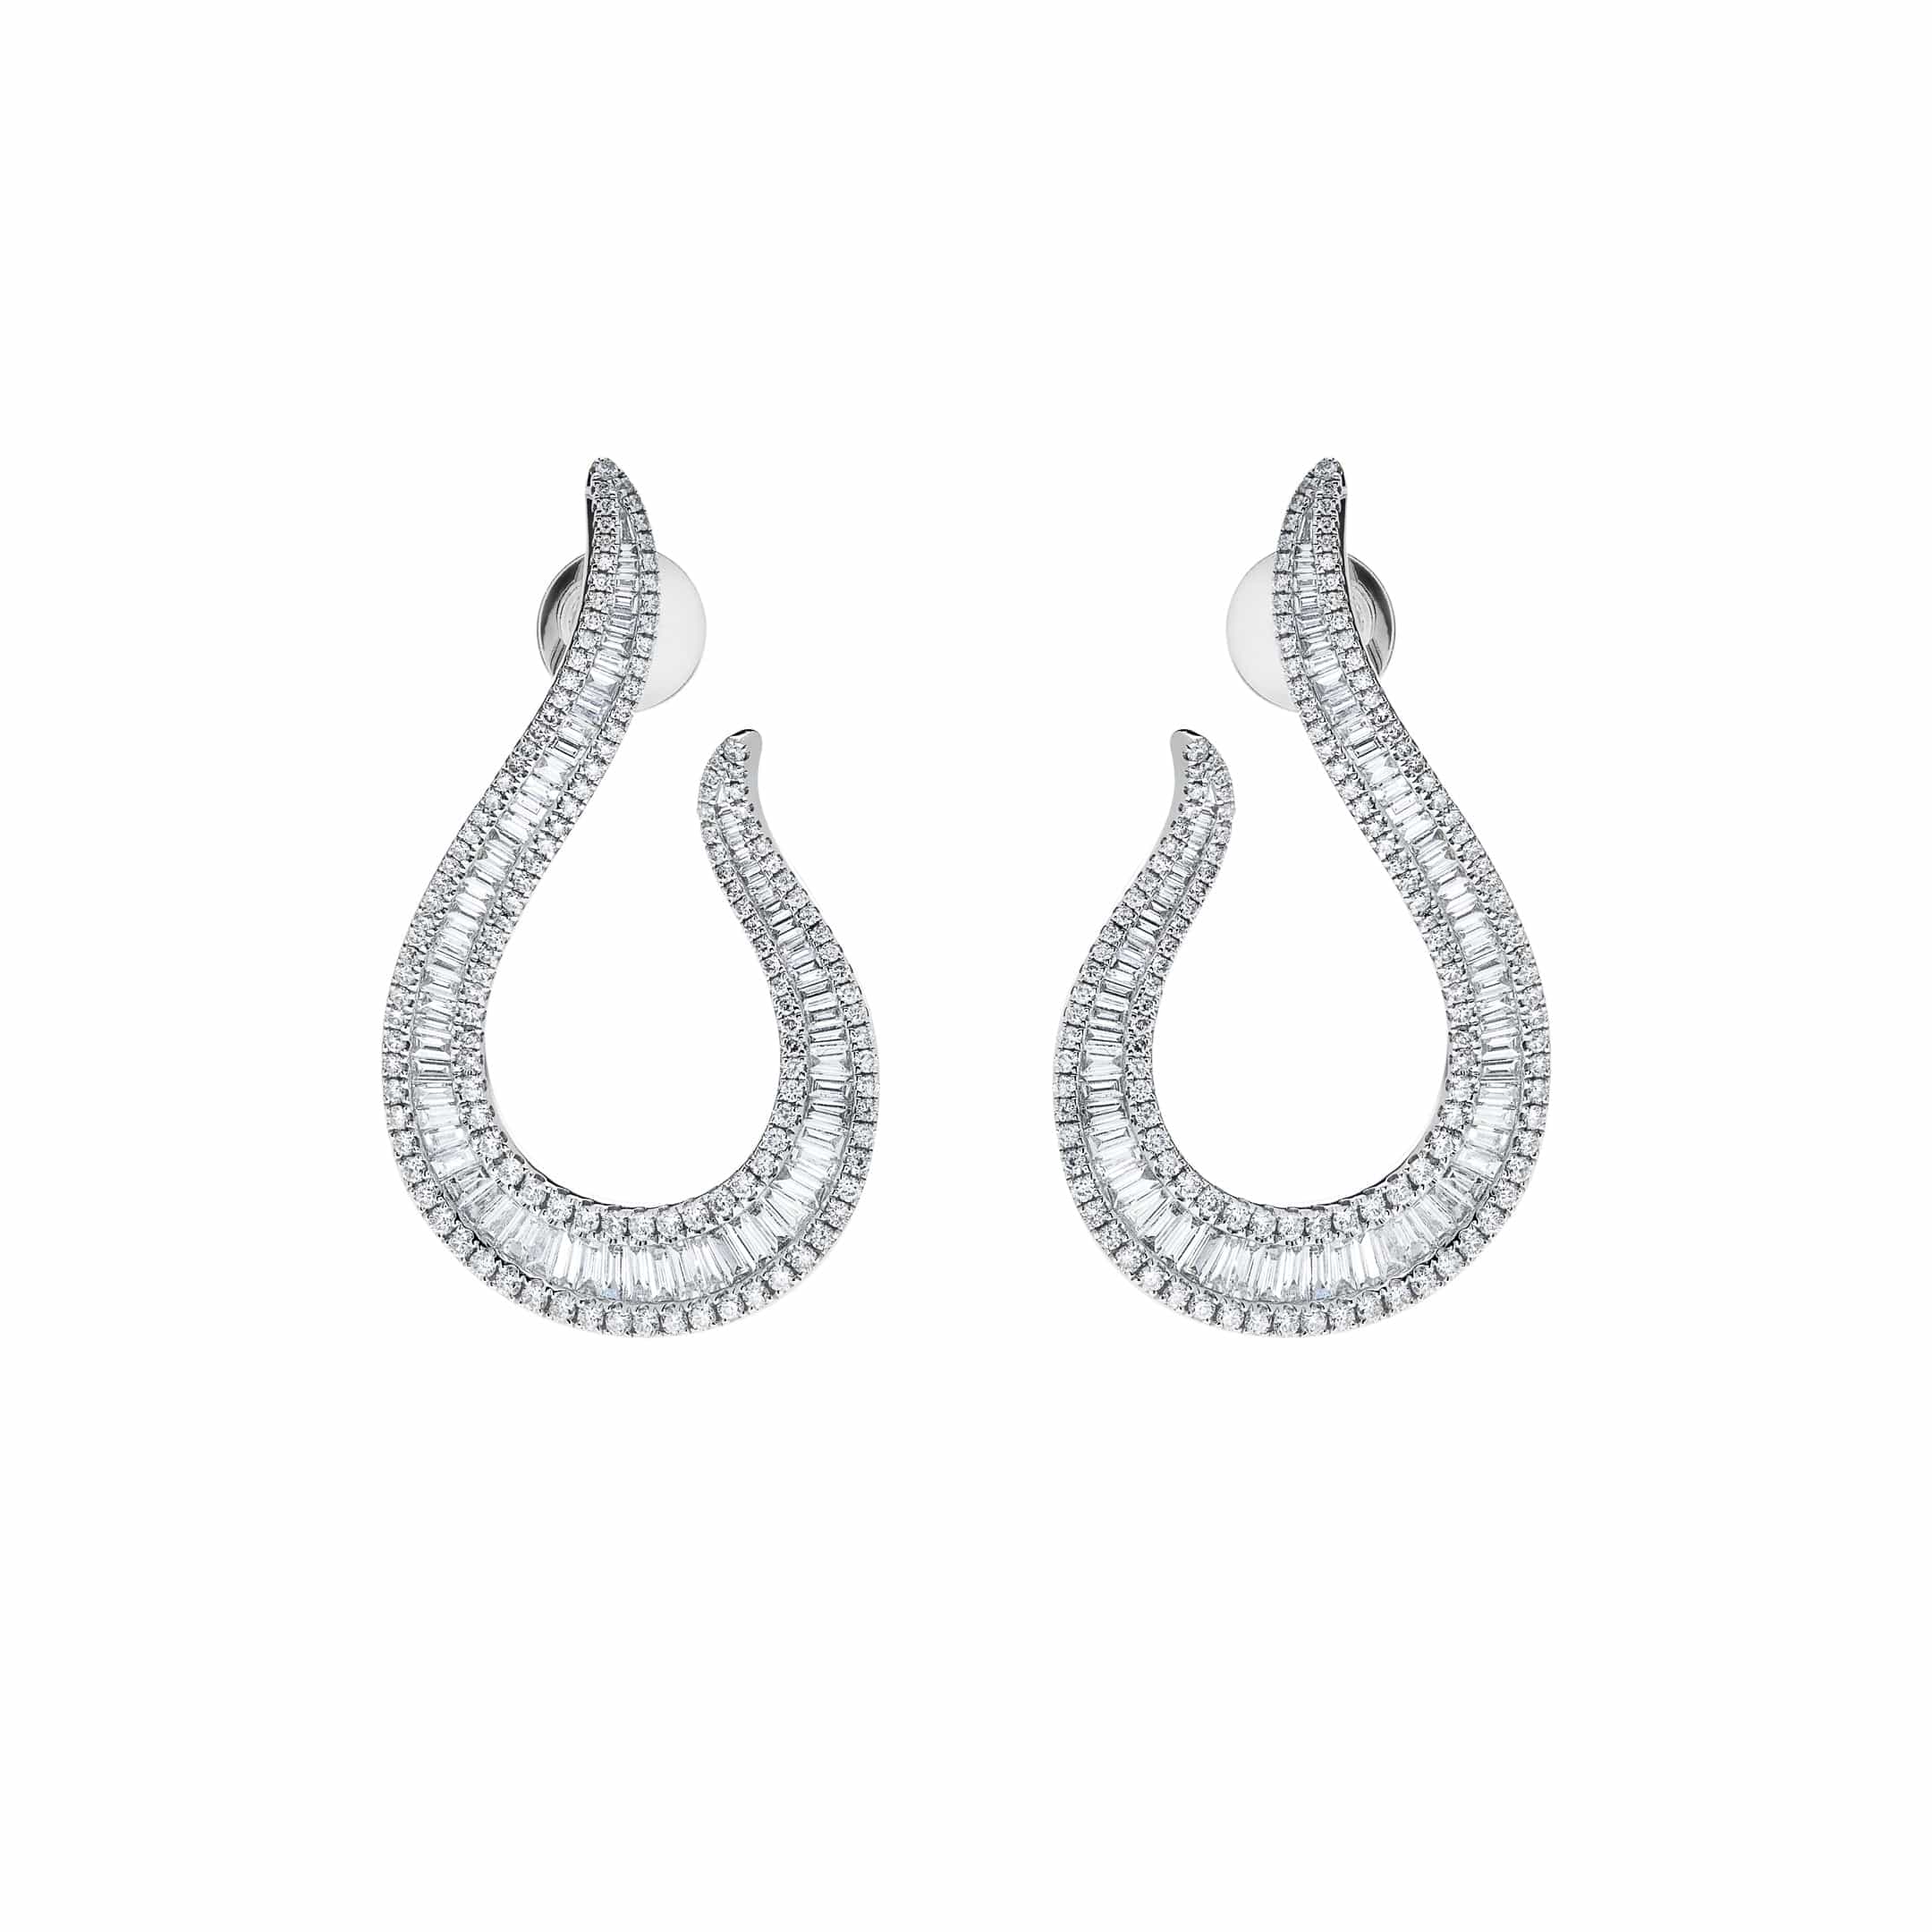 Baguette and Pave Diamond Drop White Gold Earrings